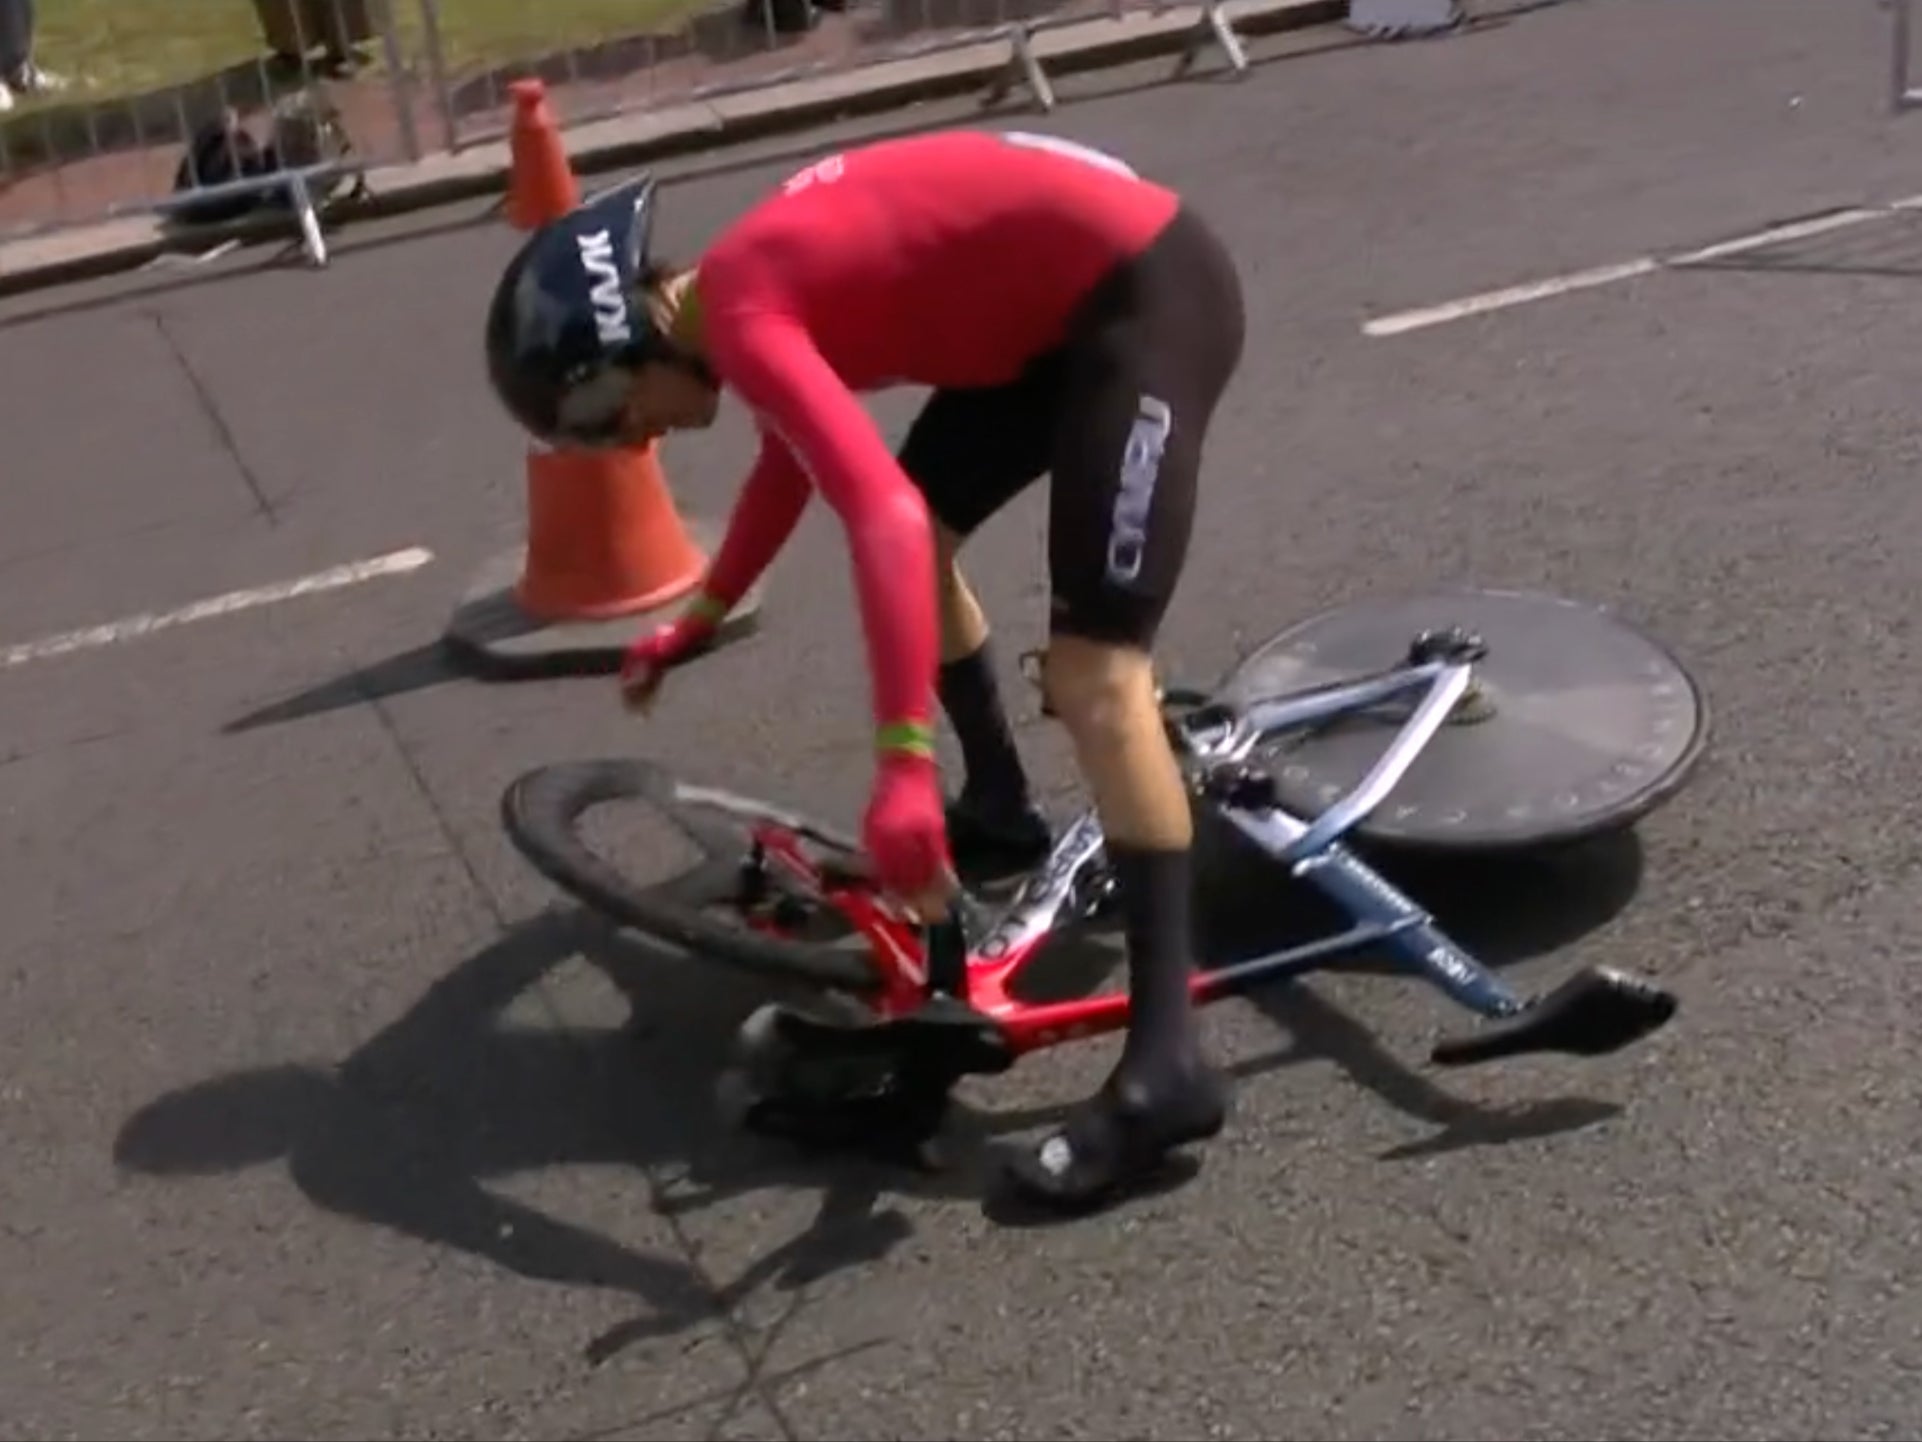 Geraint Thomas tries to remount after falling during the time trial